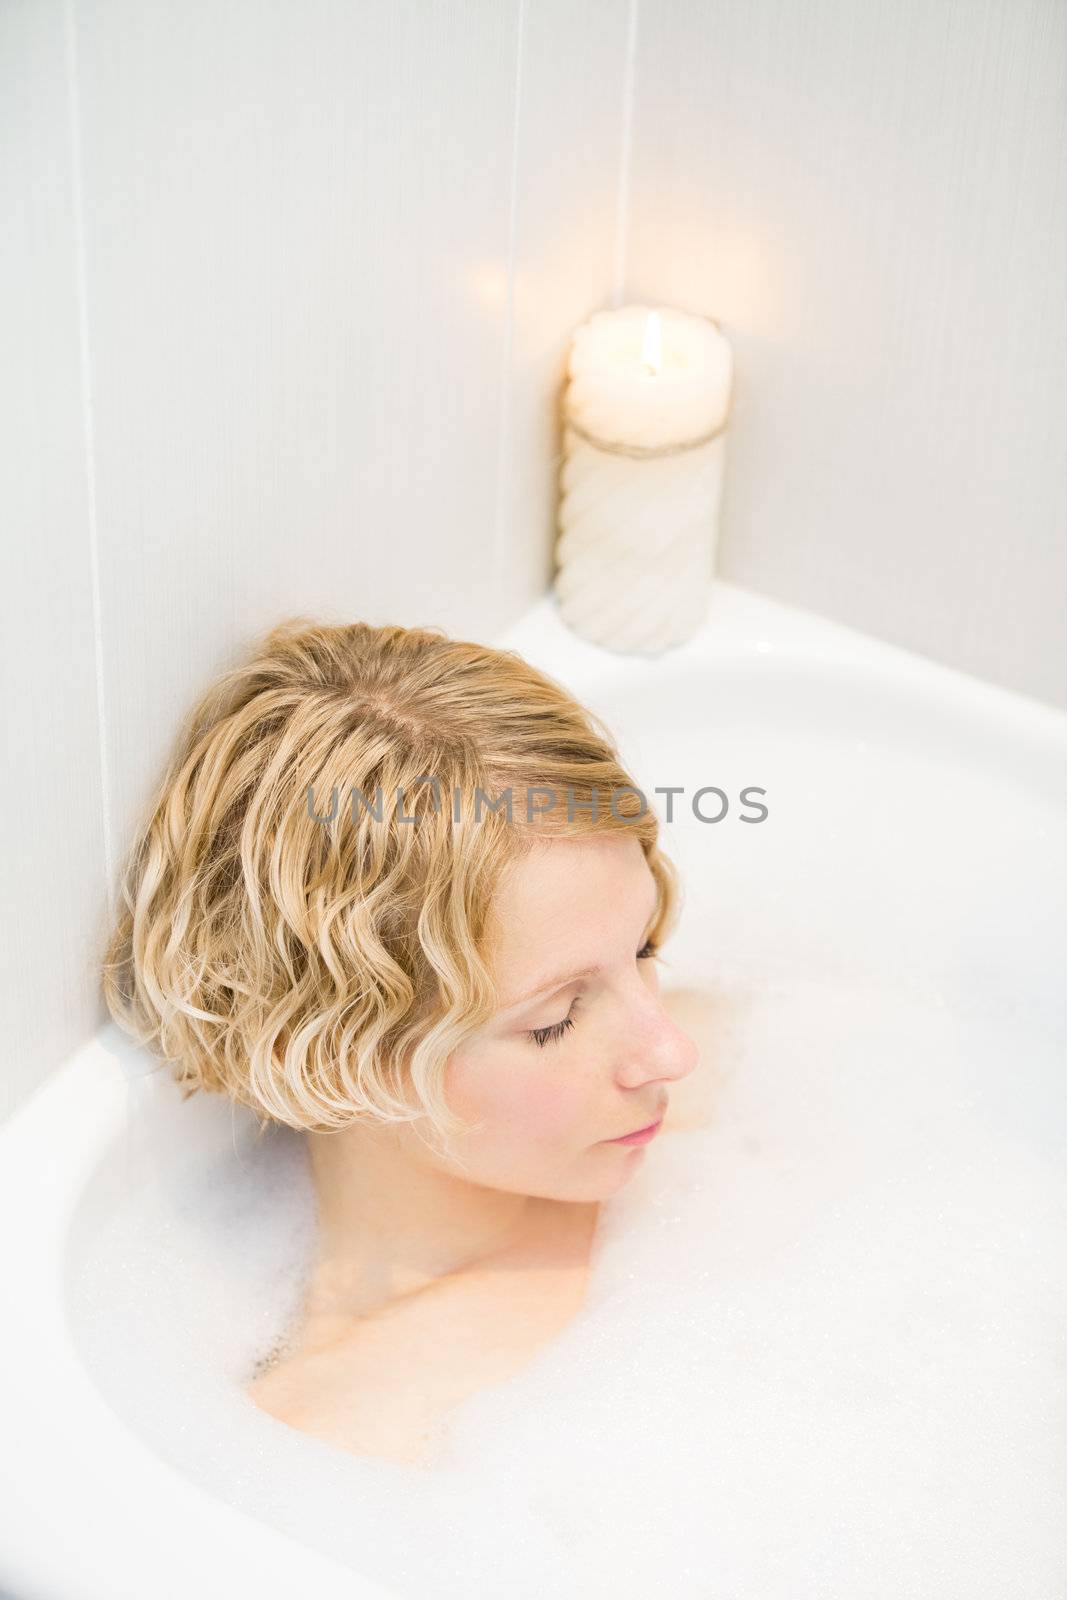 Young woman relaxing in the bath with candlelight